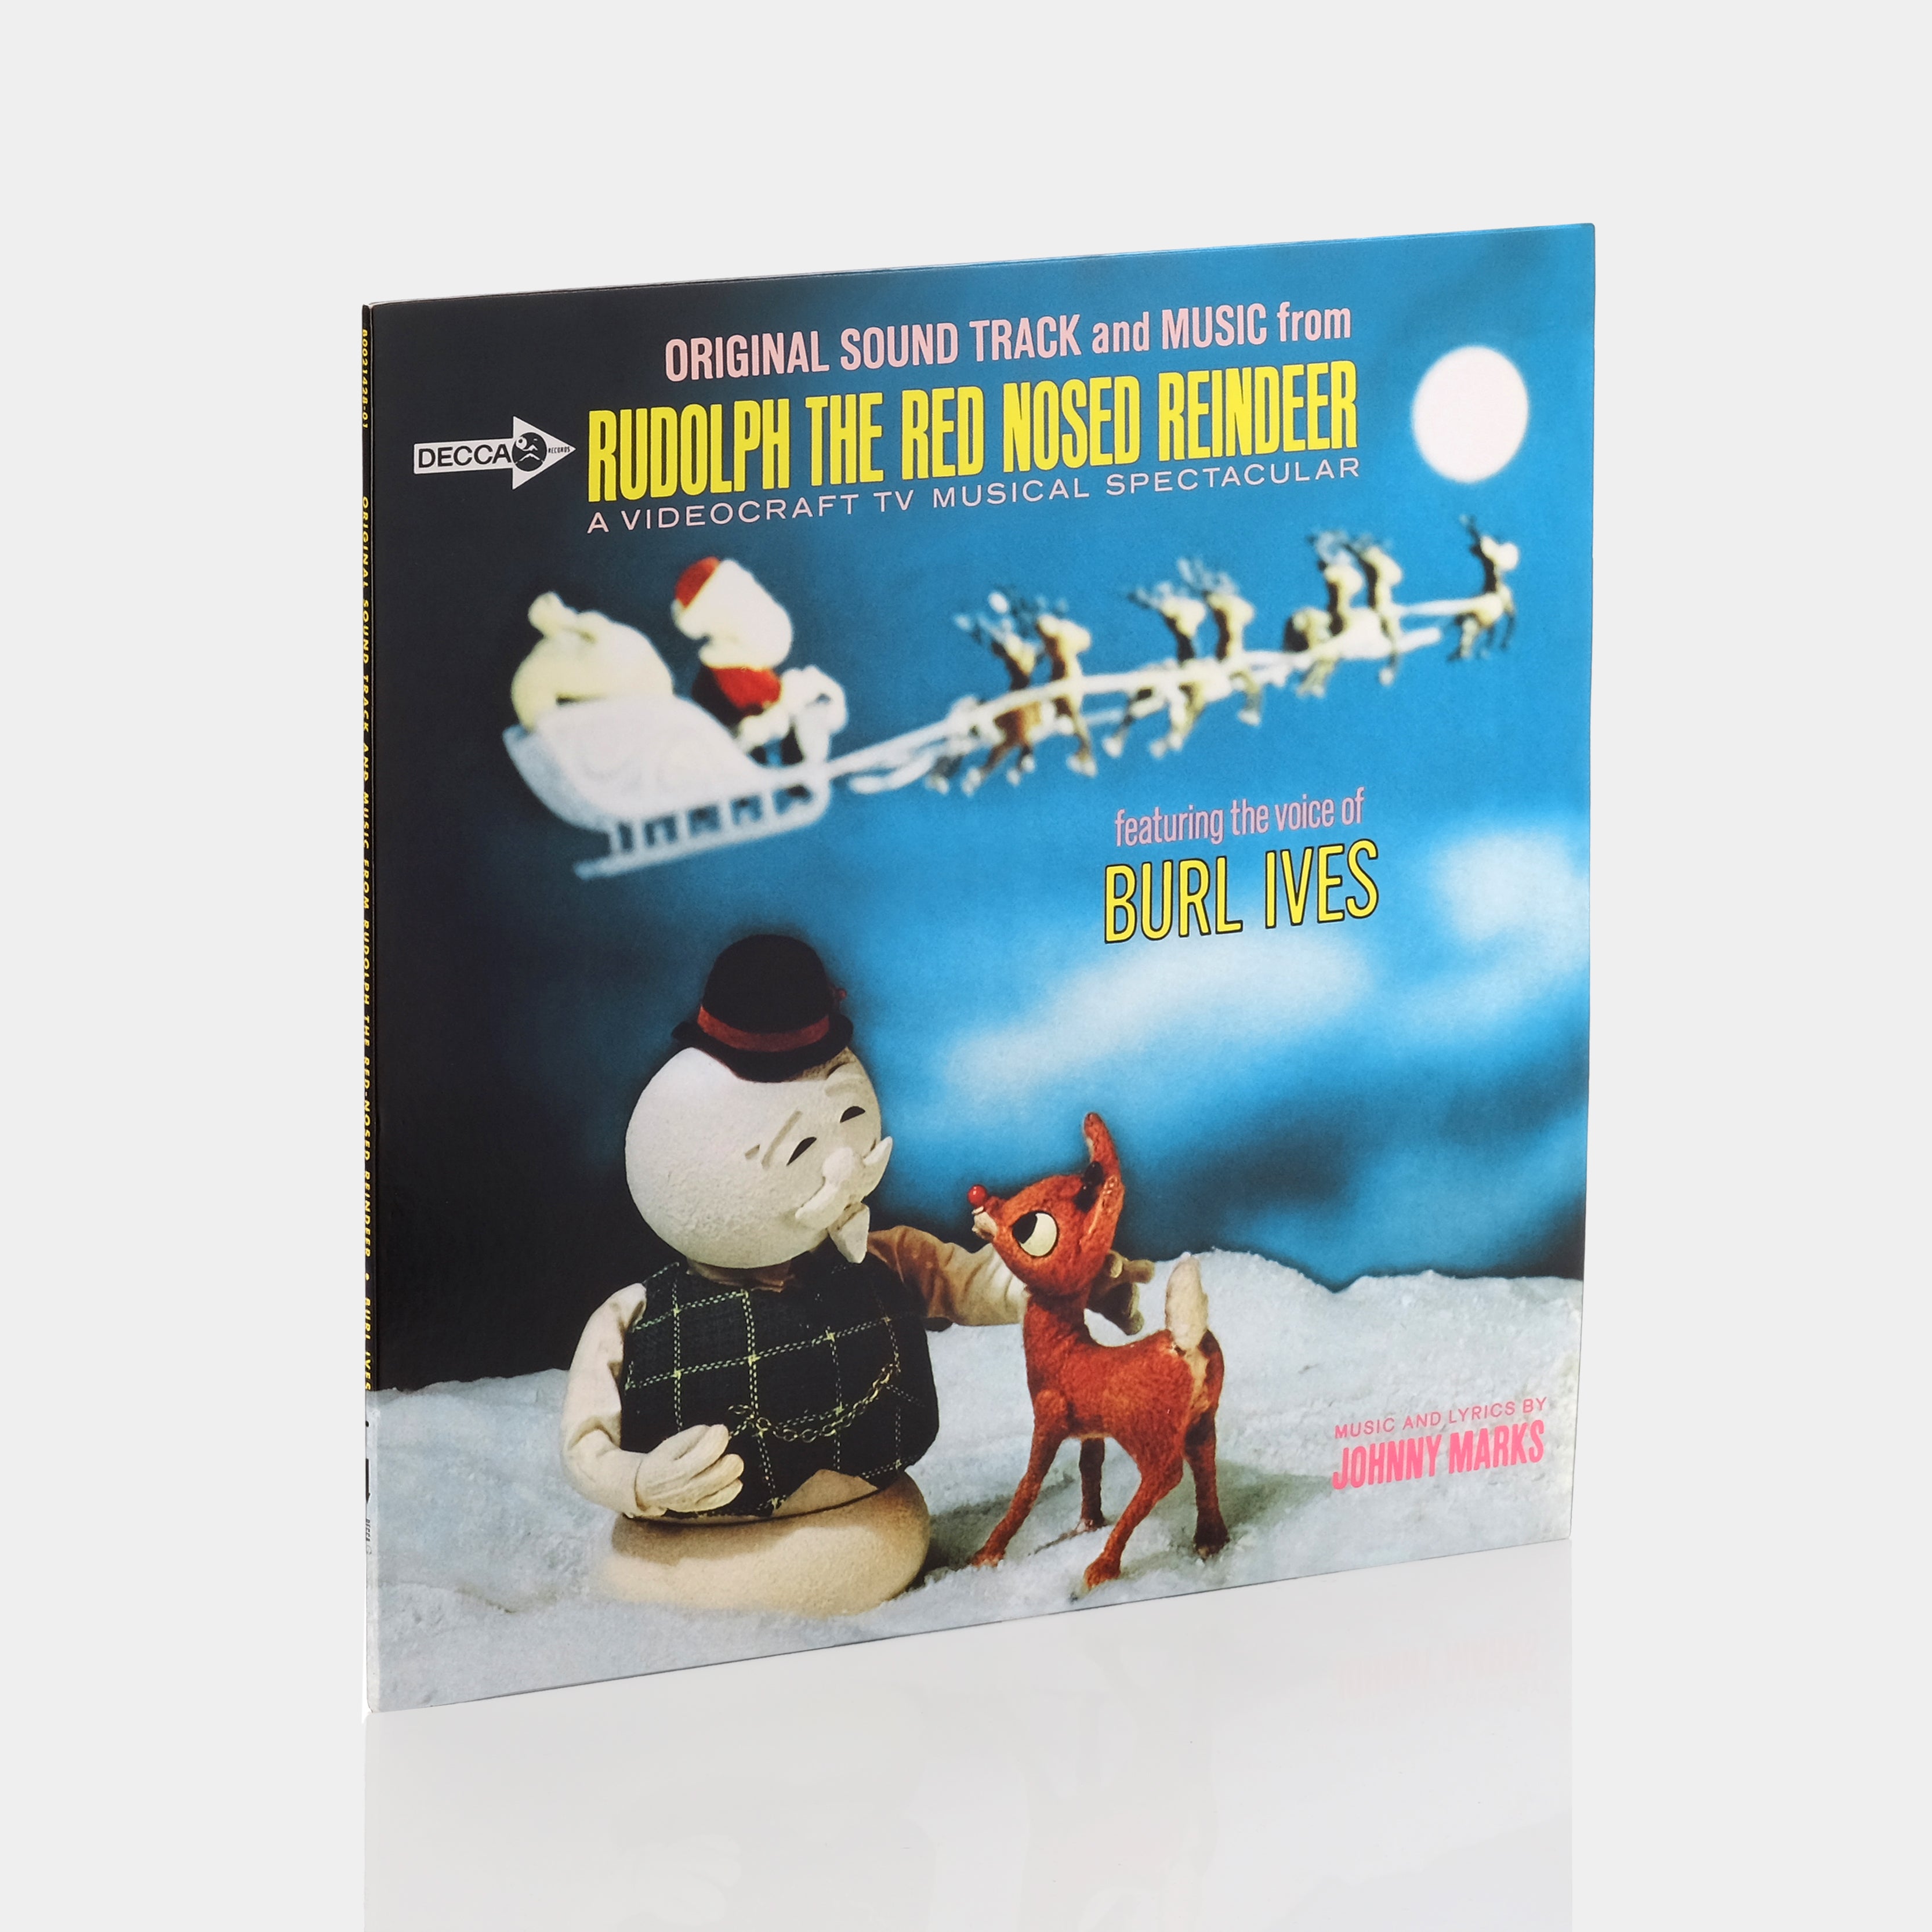 Burl Ives - Original Sound Track And Music From Rudolph The Red Nosed Reindeer LP Vinyl Record